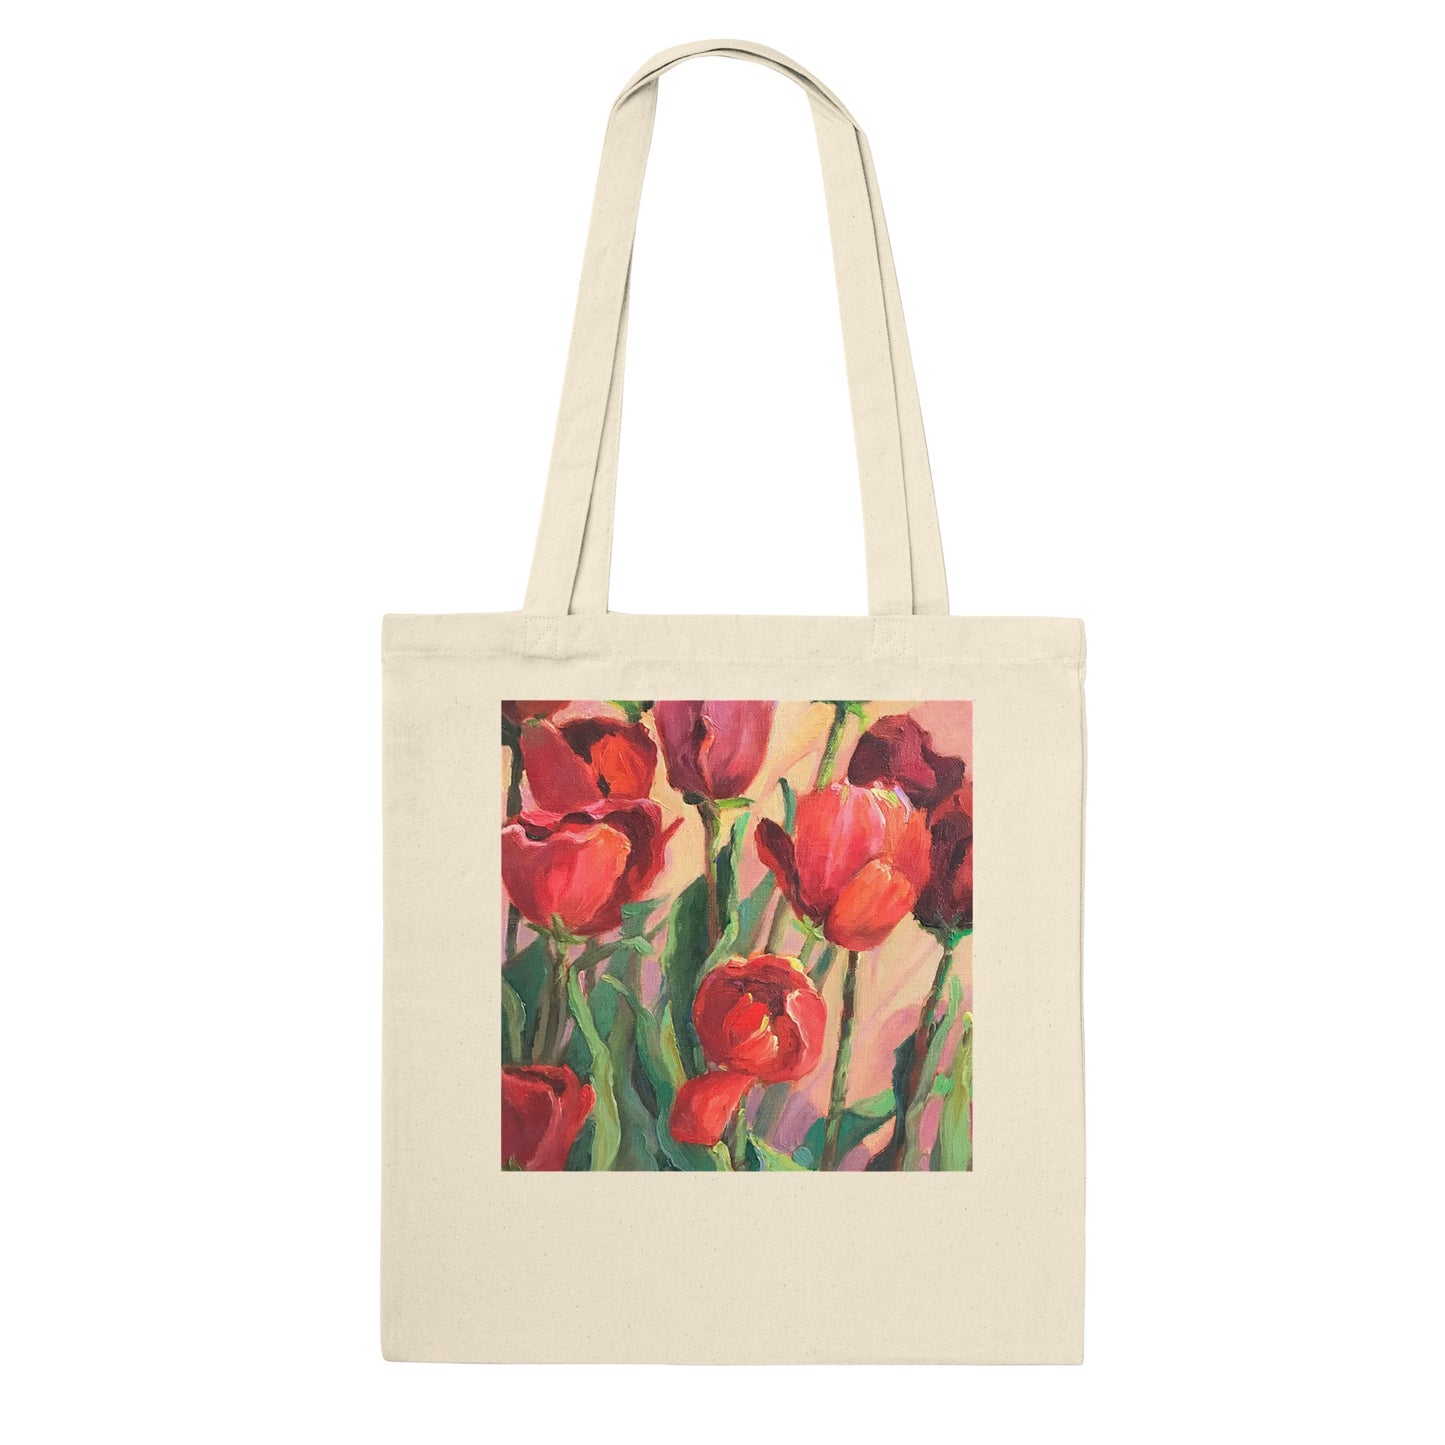 "Tulips" Floral Classic Tote Bag by Barbara Cleary Designs